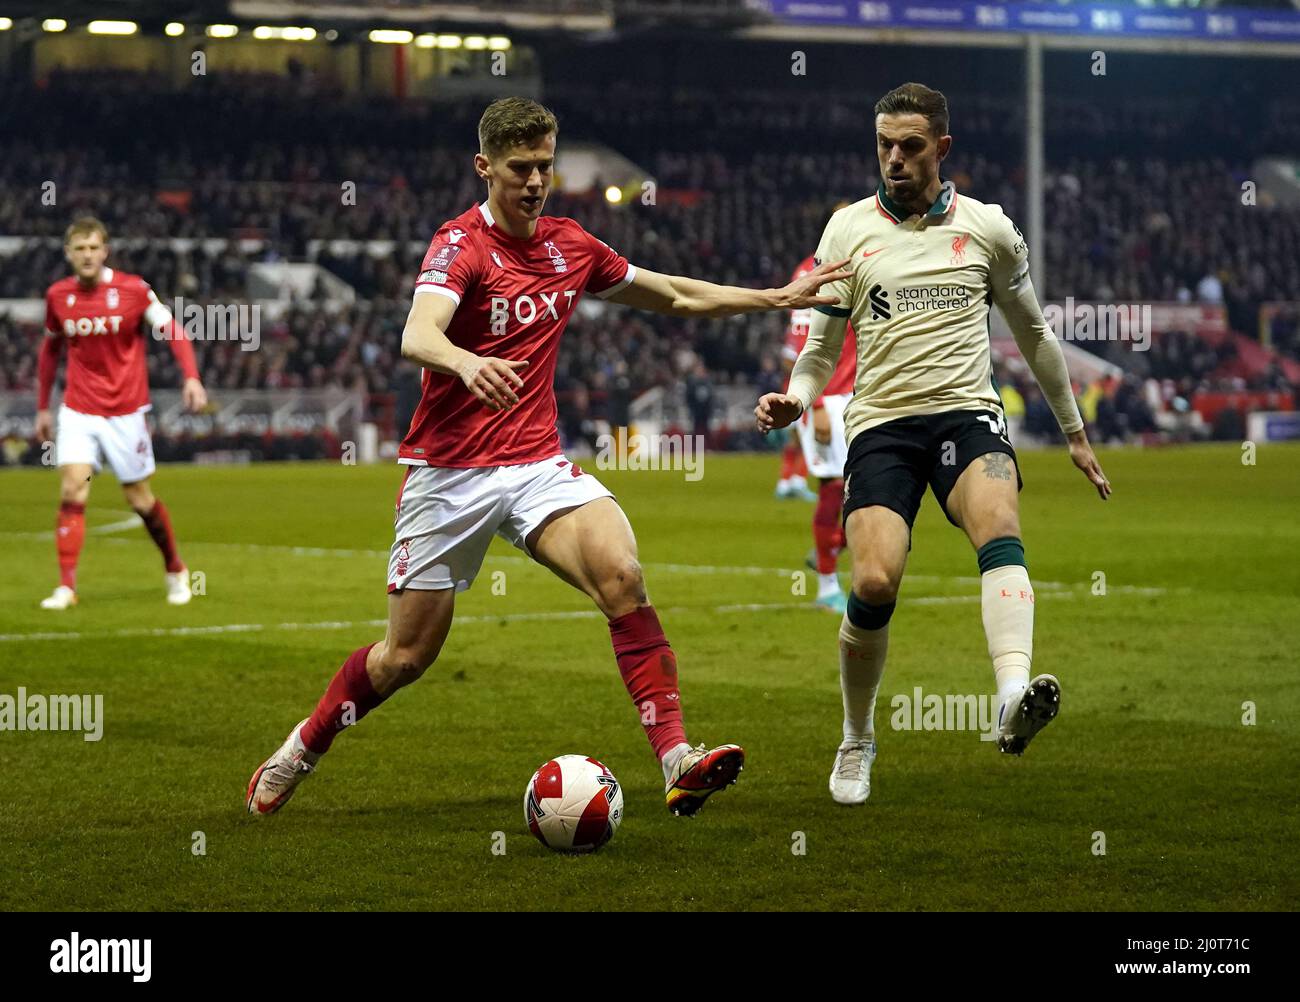 Nottingham Forest's Ryan Yates (left) and Liverpool's Jordan Henderson  battle for the ball during the Emirates FA Cup quarter final match at the  City Ground, Nottingham. Picture date: Sunday March 20, 2022